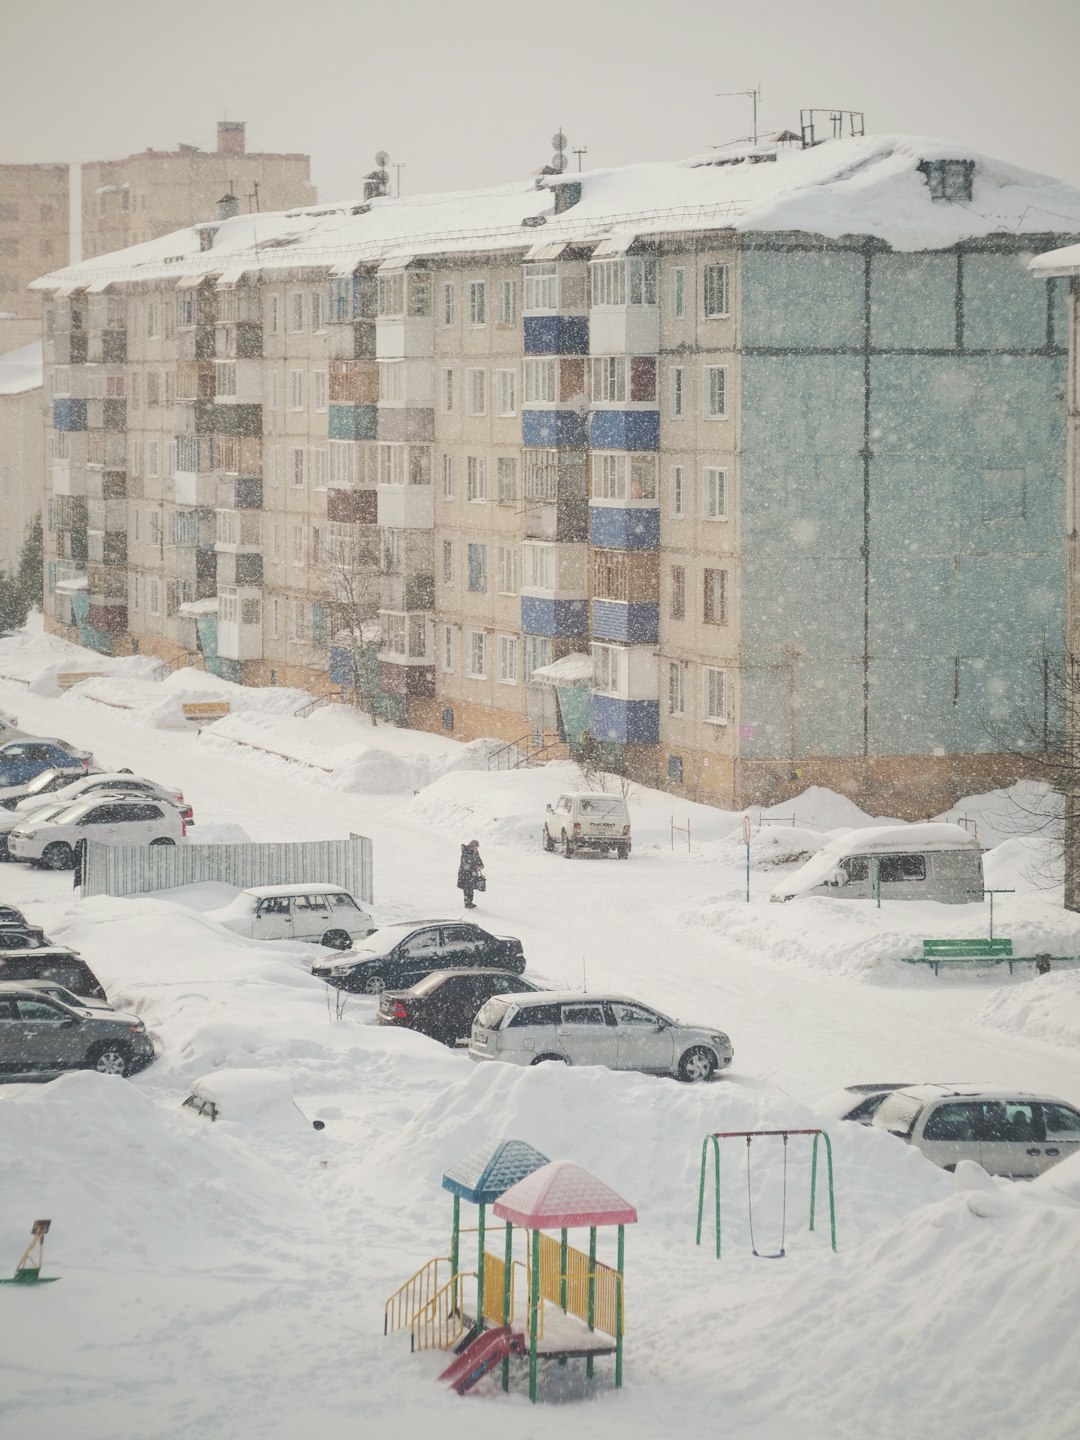 cars parked on snow covered ground near building during daytime